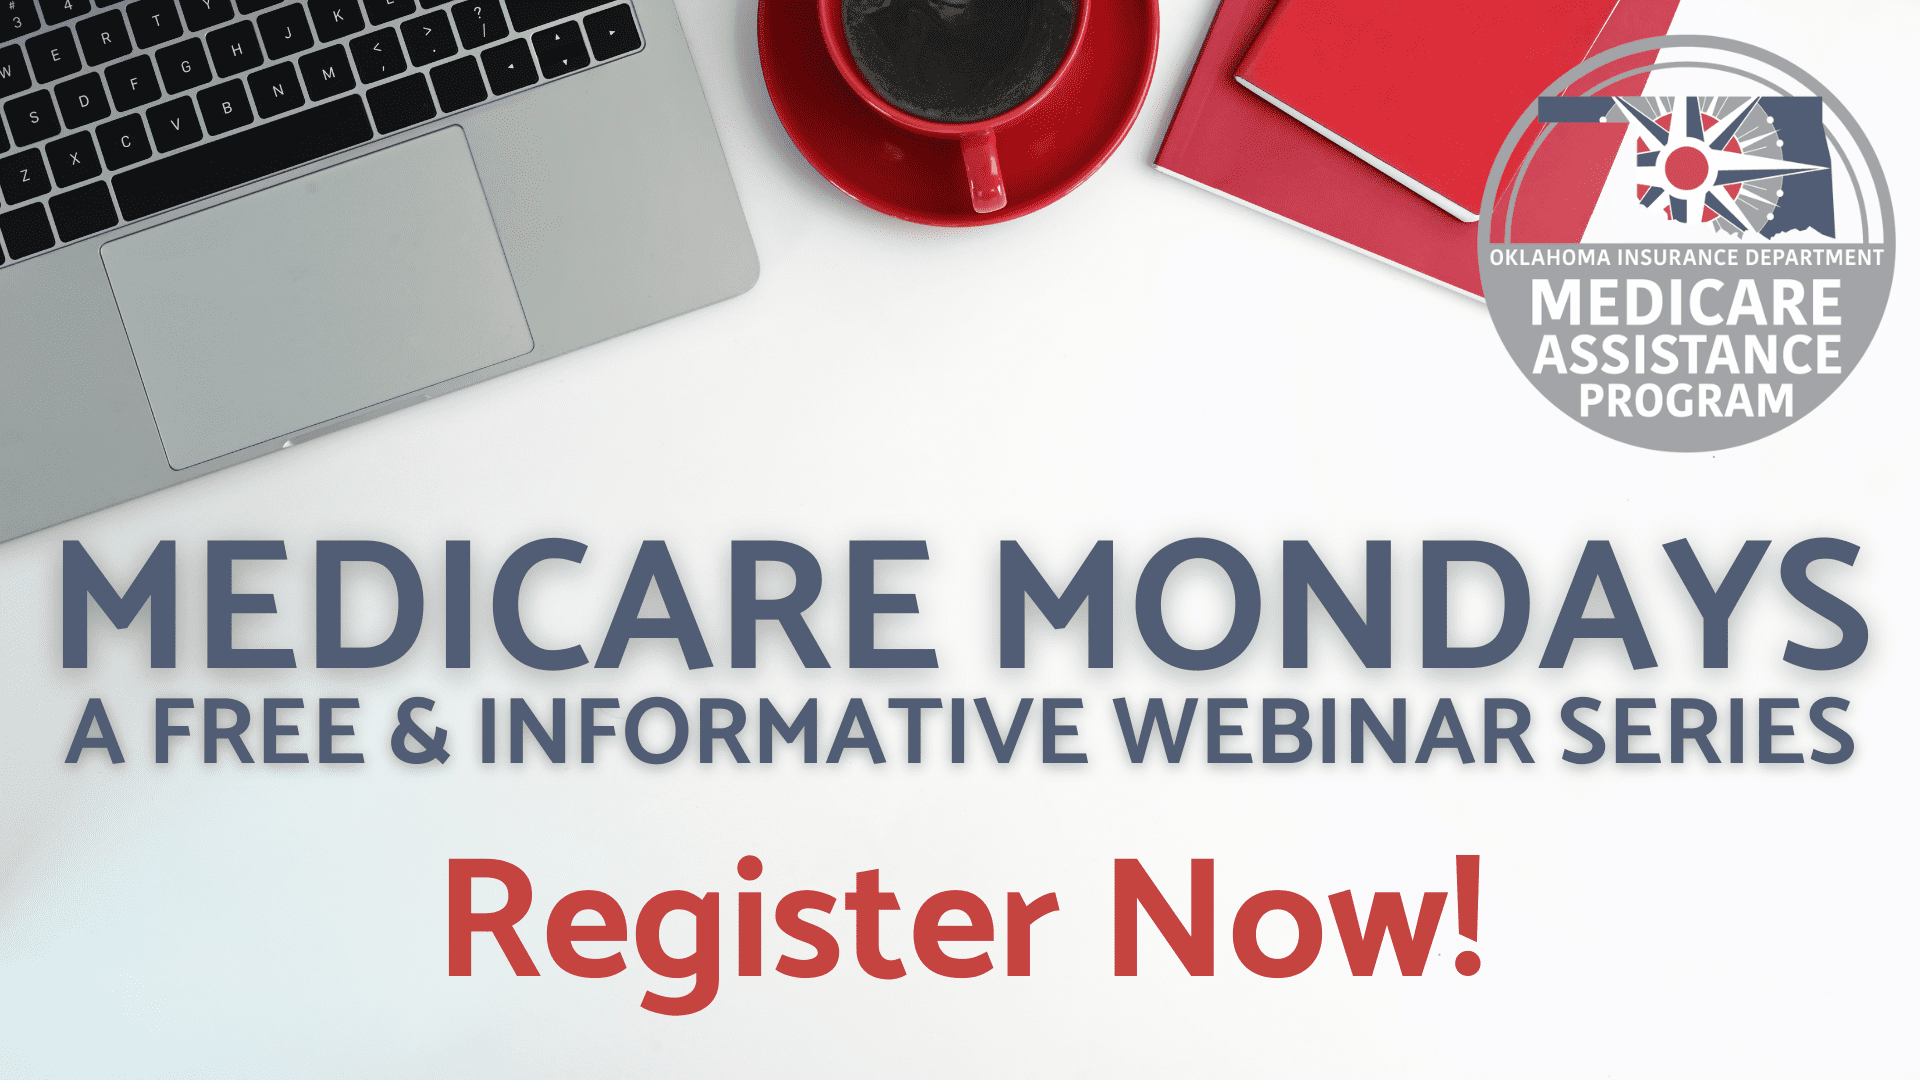 Register Now for Medicare Mondays a free and informative webinar series